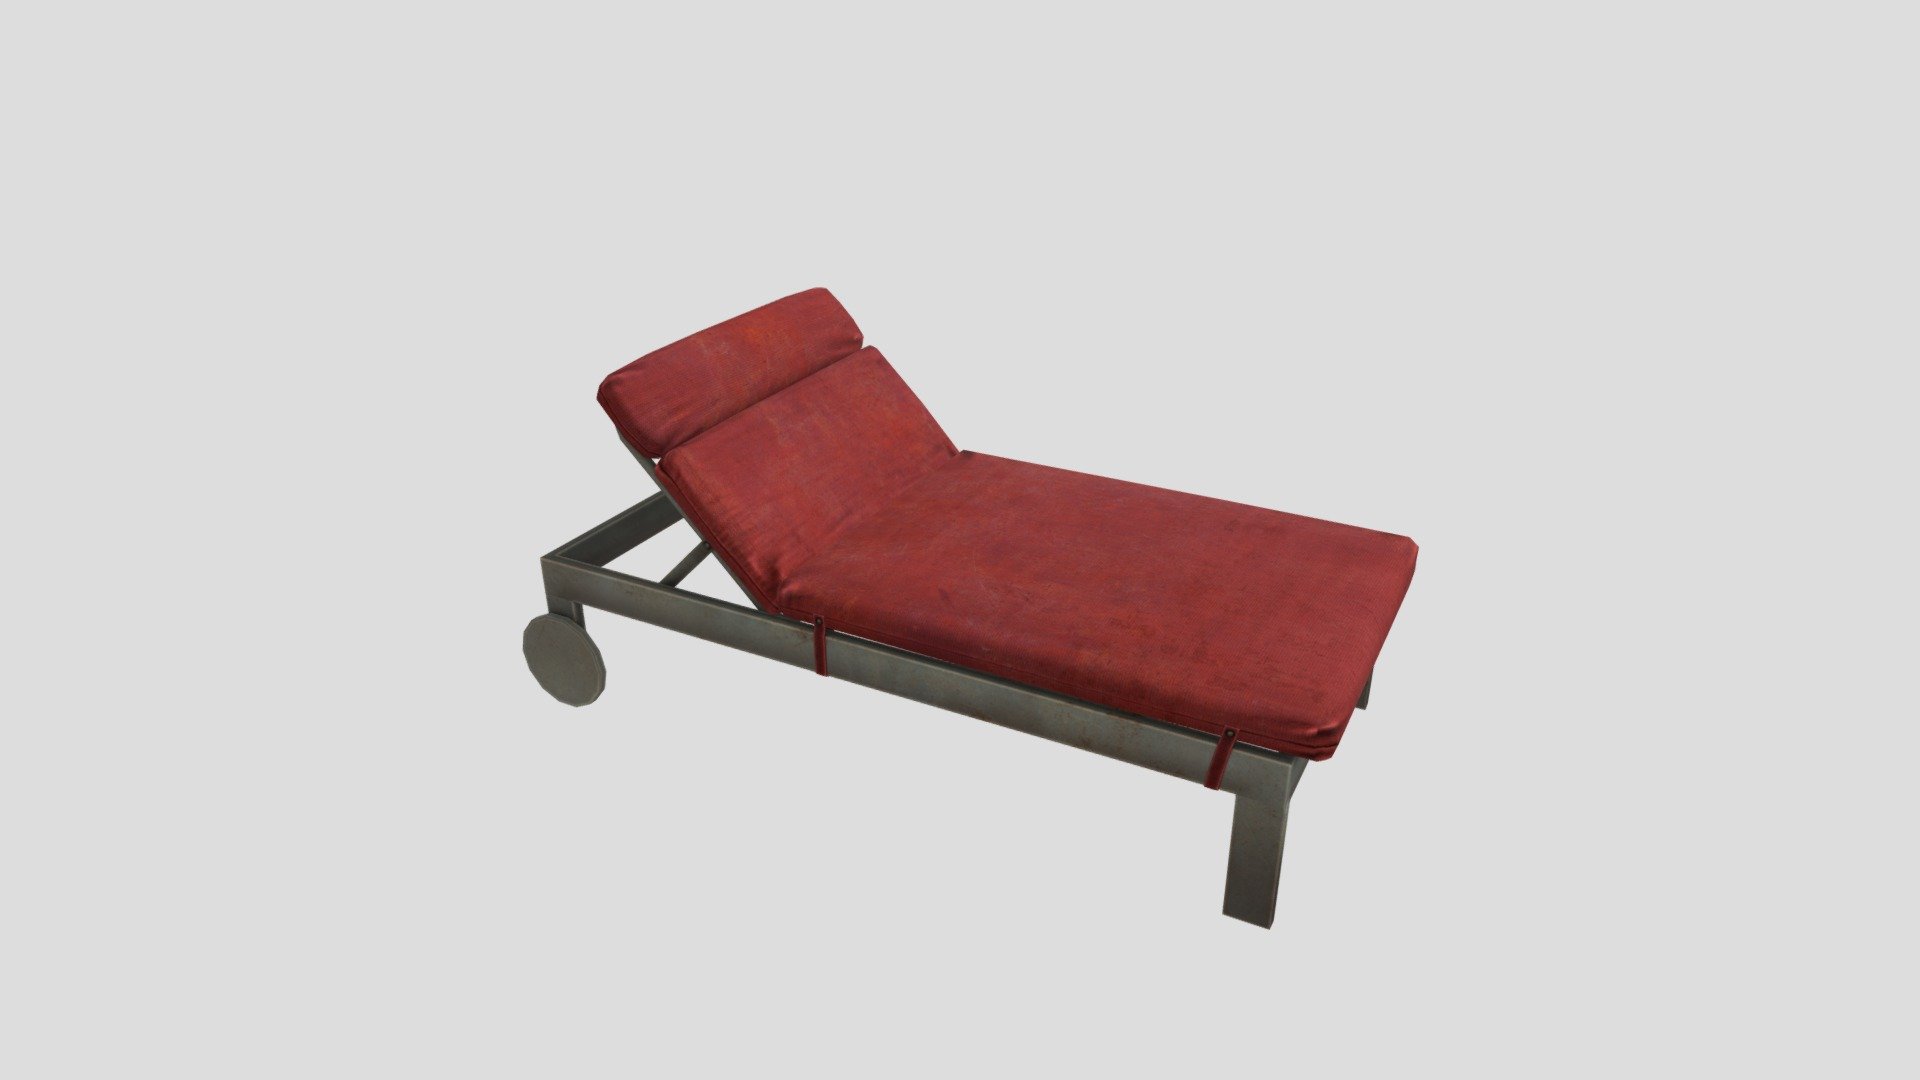 3D Lounge Chair. Chair for pool.

This package contains a lounge ready to use. The pack has highly detailed lounge ready for use in your project. Just drag and drop prefab into your scene and achieve beautiful results in no time.

Can be used for video games and Urban projects, interior projects exterior projects..etc Available formats FBX, 3DS Max 2017.

We are here to empower the creators. Please contact us via the https://aaanimators.com/#contact-area if you are having issues with our assets. Our team will get back to you momentarily.

Mesh complexities:

Lounge_03 970 verts; 1272 tris uv

Includes 1 set of textures with 3 materials:

● Diffuse

● Normal

● Specular - Lounge 03 - Buy Royalty Free 3D model by aaanimators 3d model